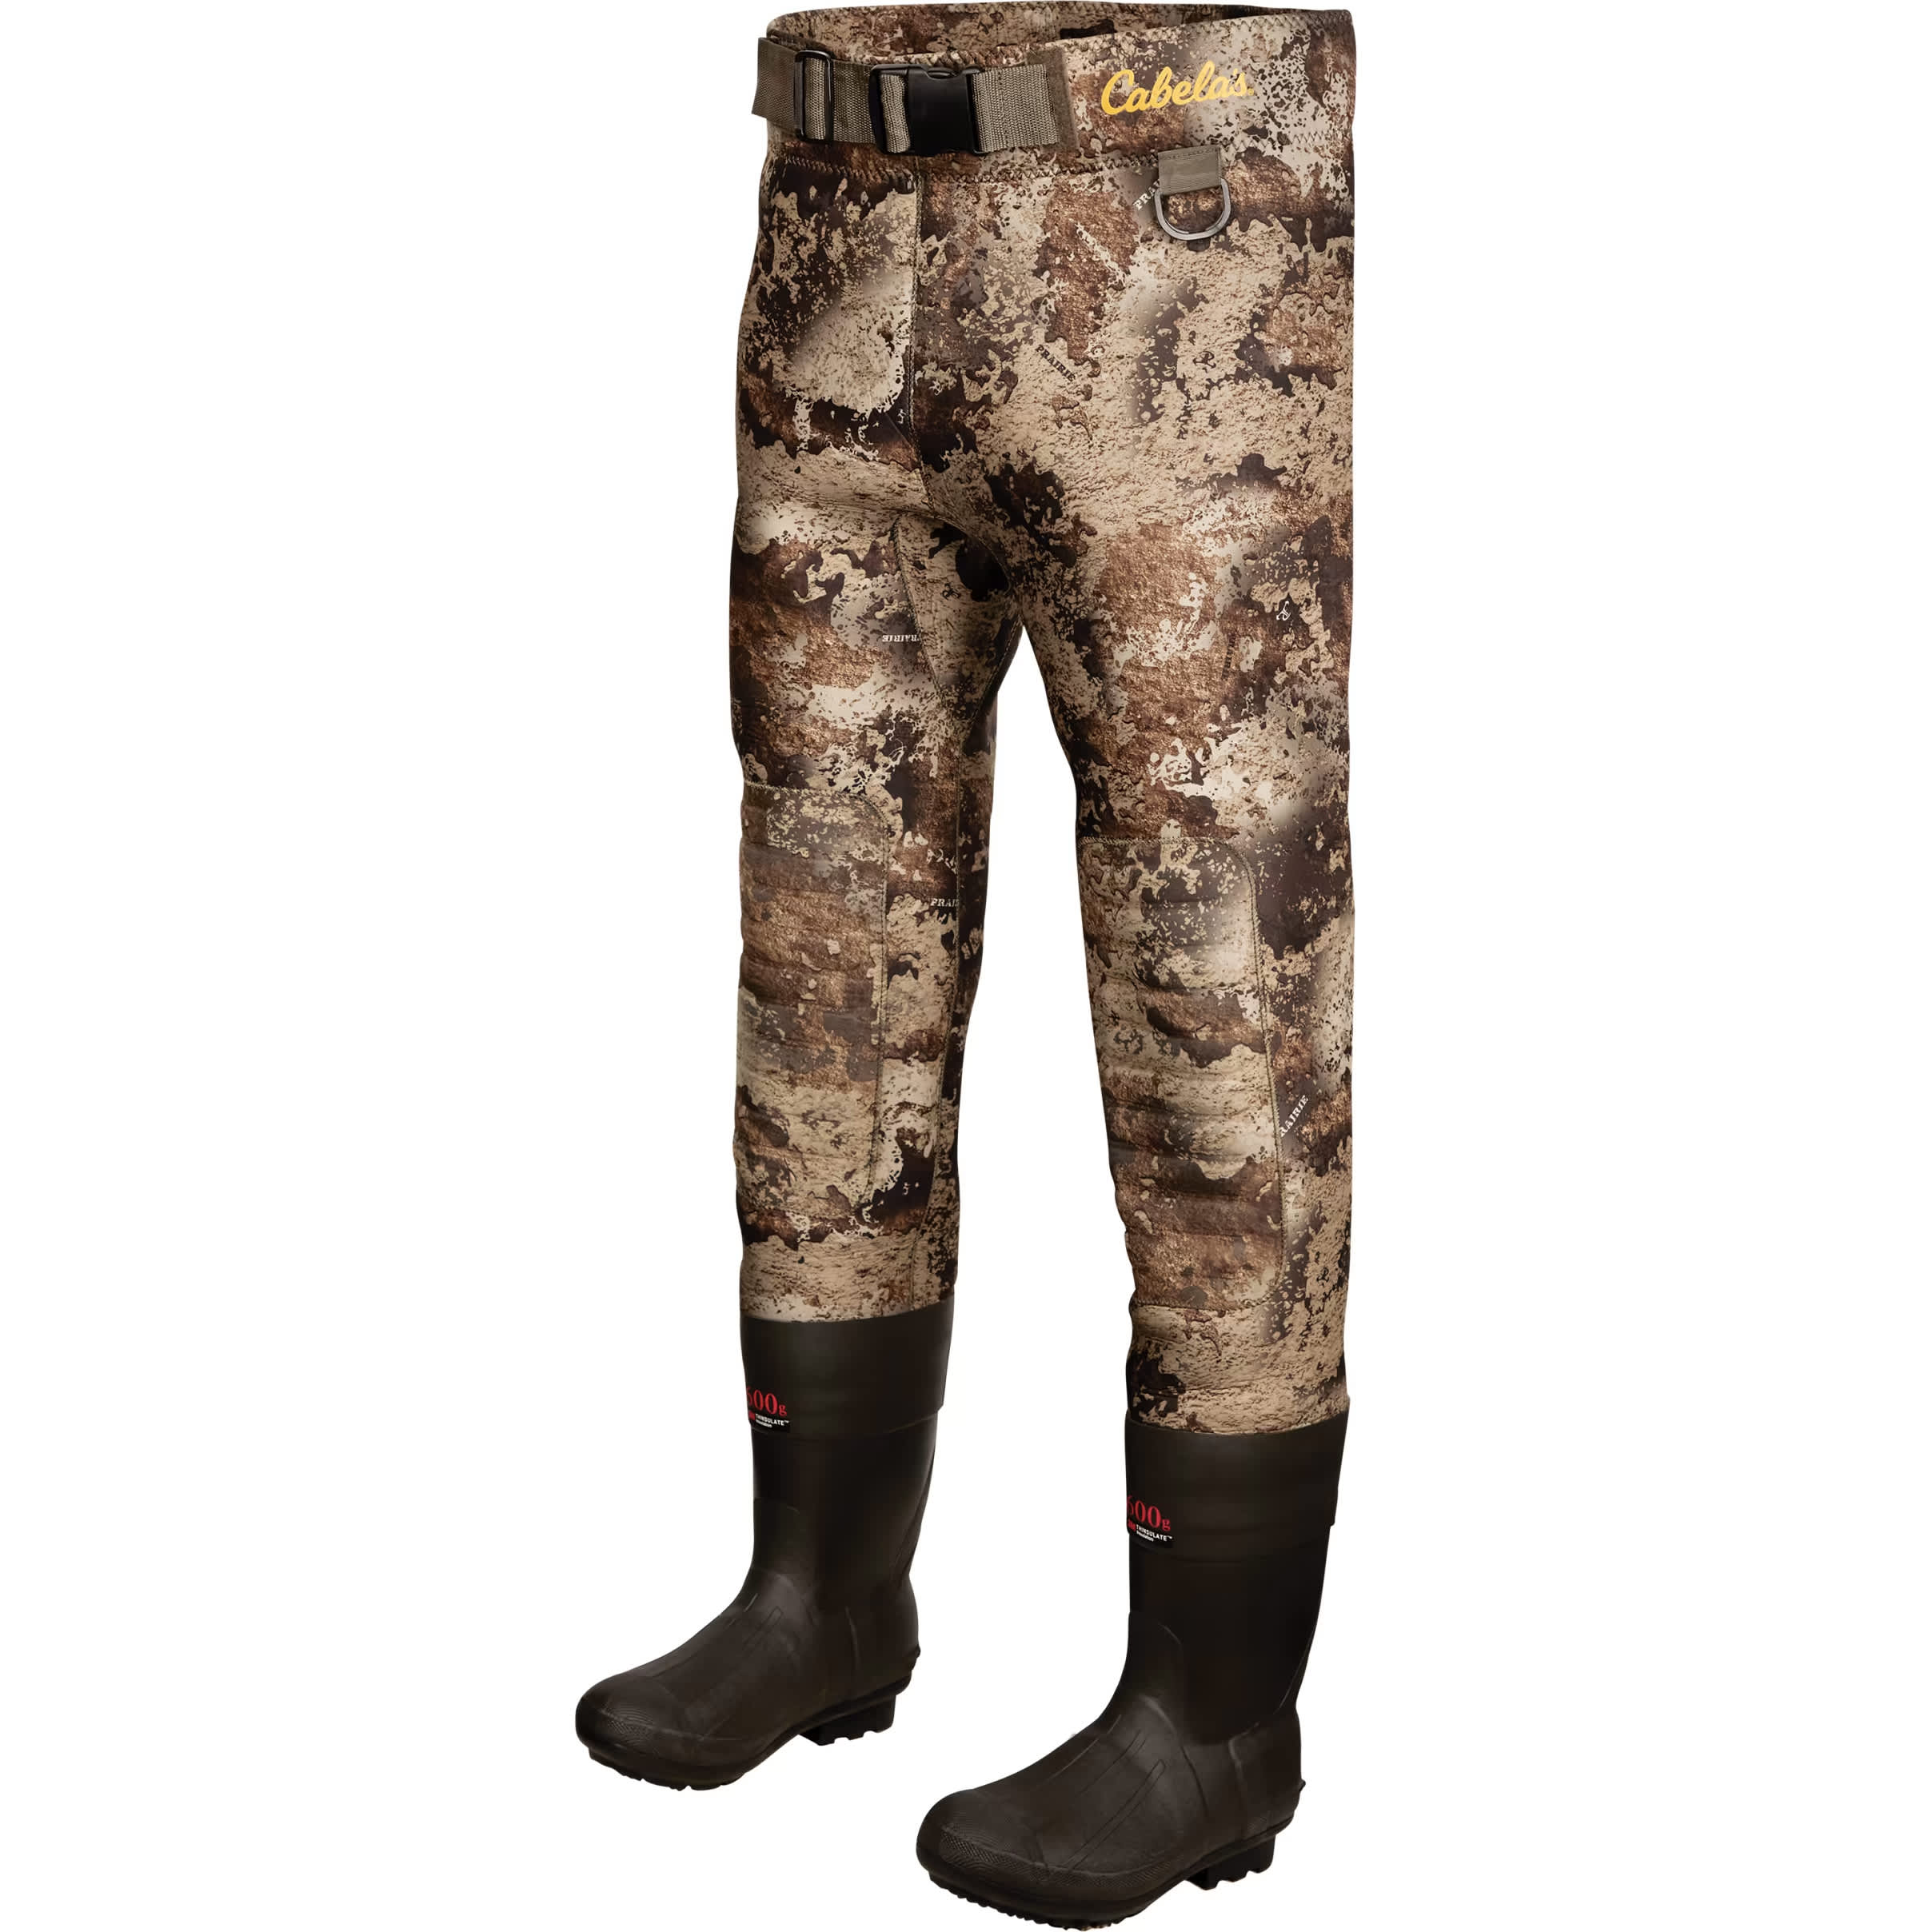 Cabela's® Men's Classic 3.5mm Waist High Hunting Waders